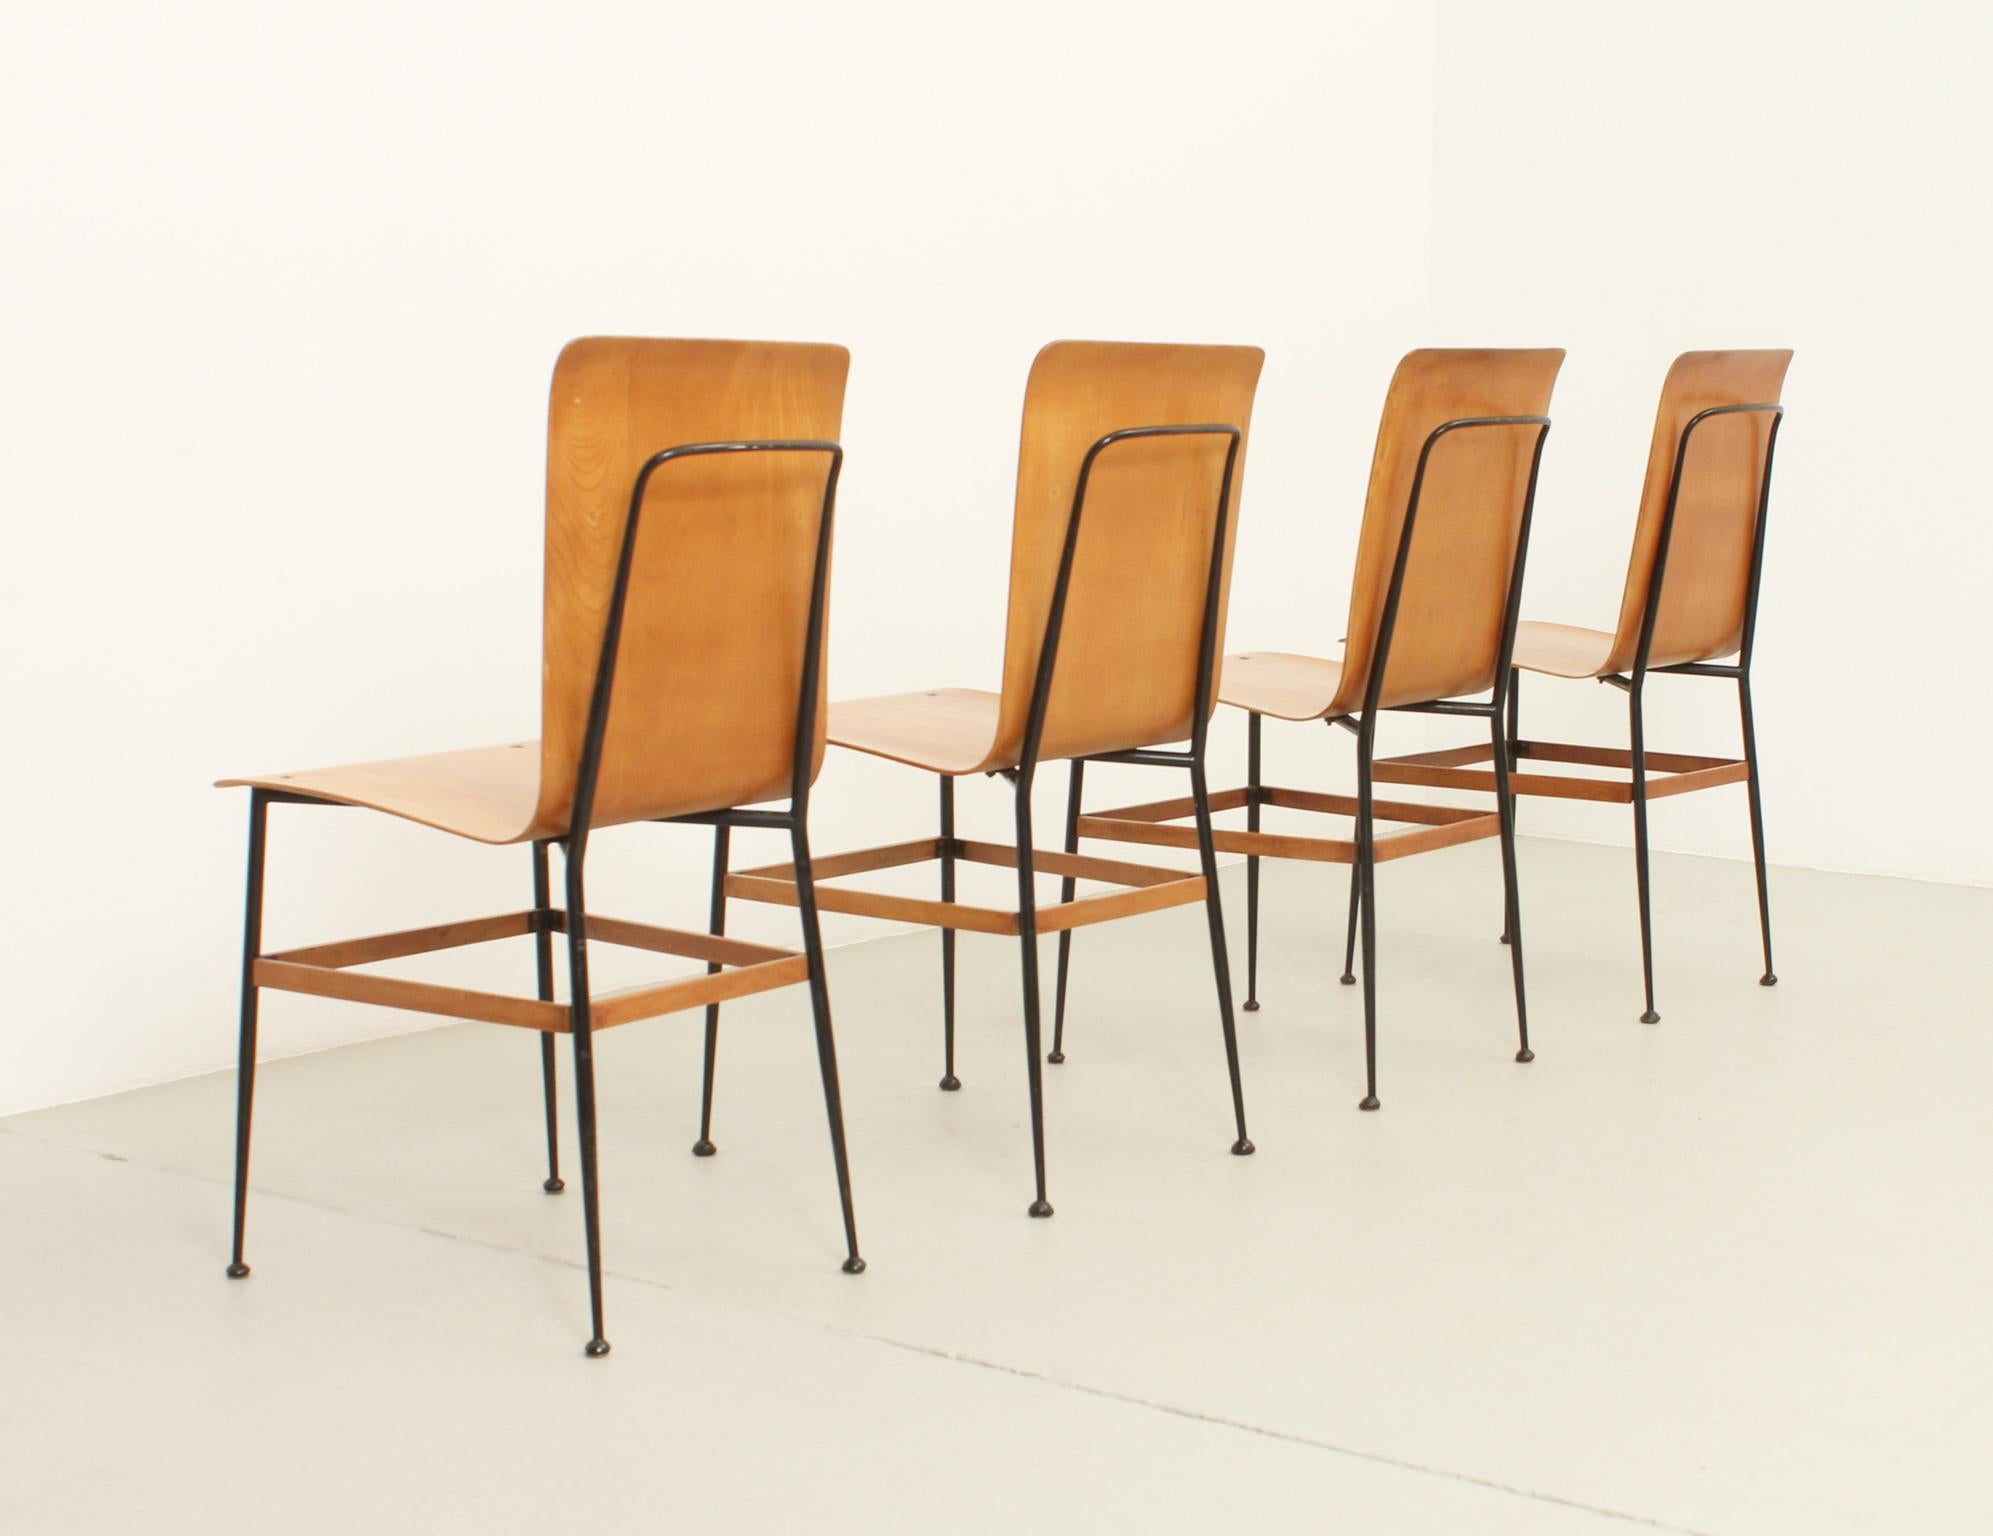 Four dining chairs designed in 1950s by Carlo Ratti and produced by Industria Legni Curvati, Italy. Plywood seat with black lacquered metal frame. Signed.